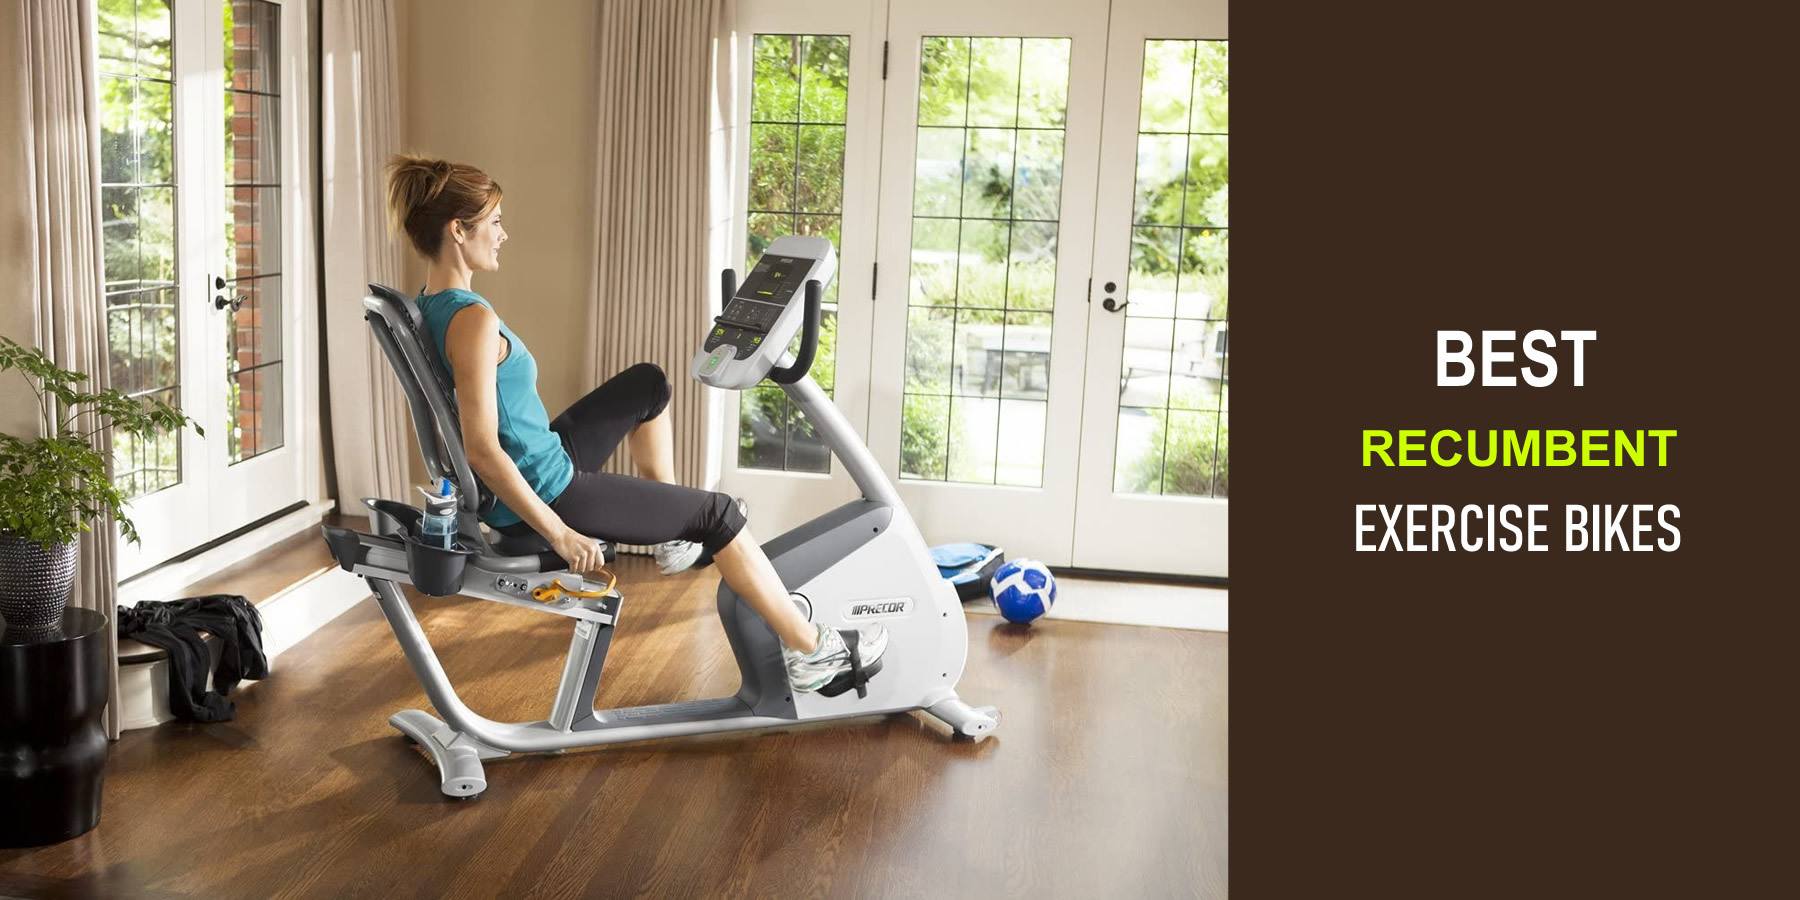 Best Recumbent Exercise Bikes Reviews & Buying Guide